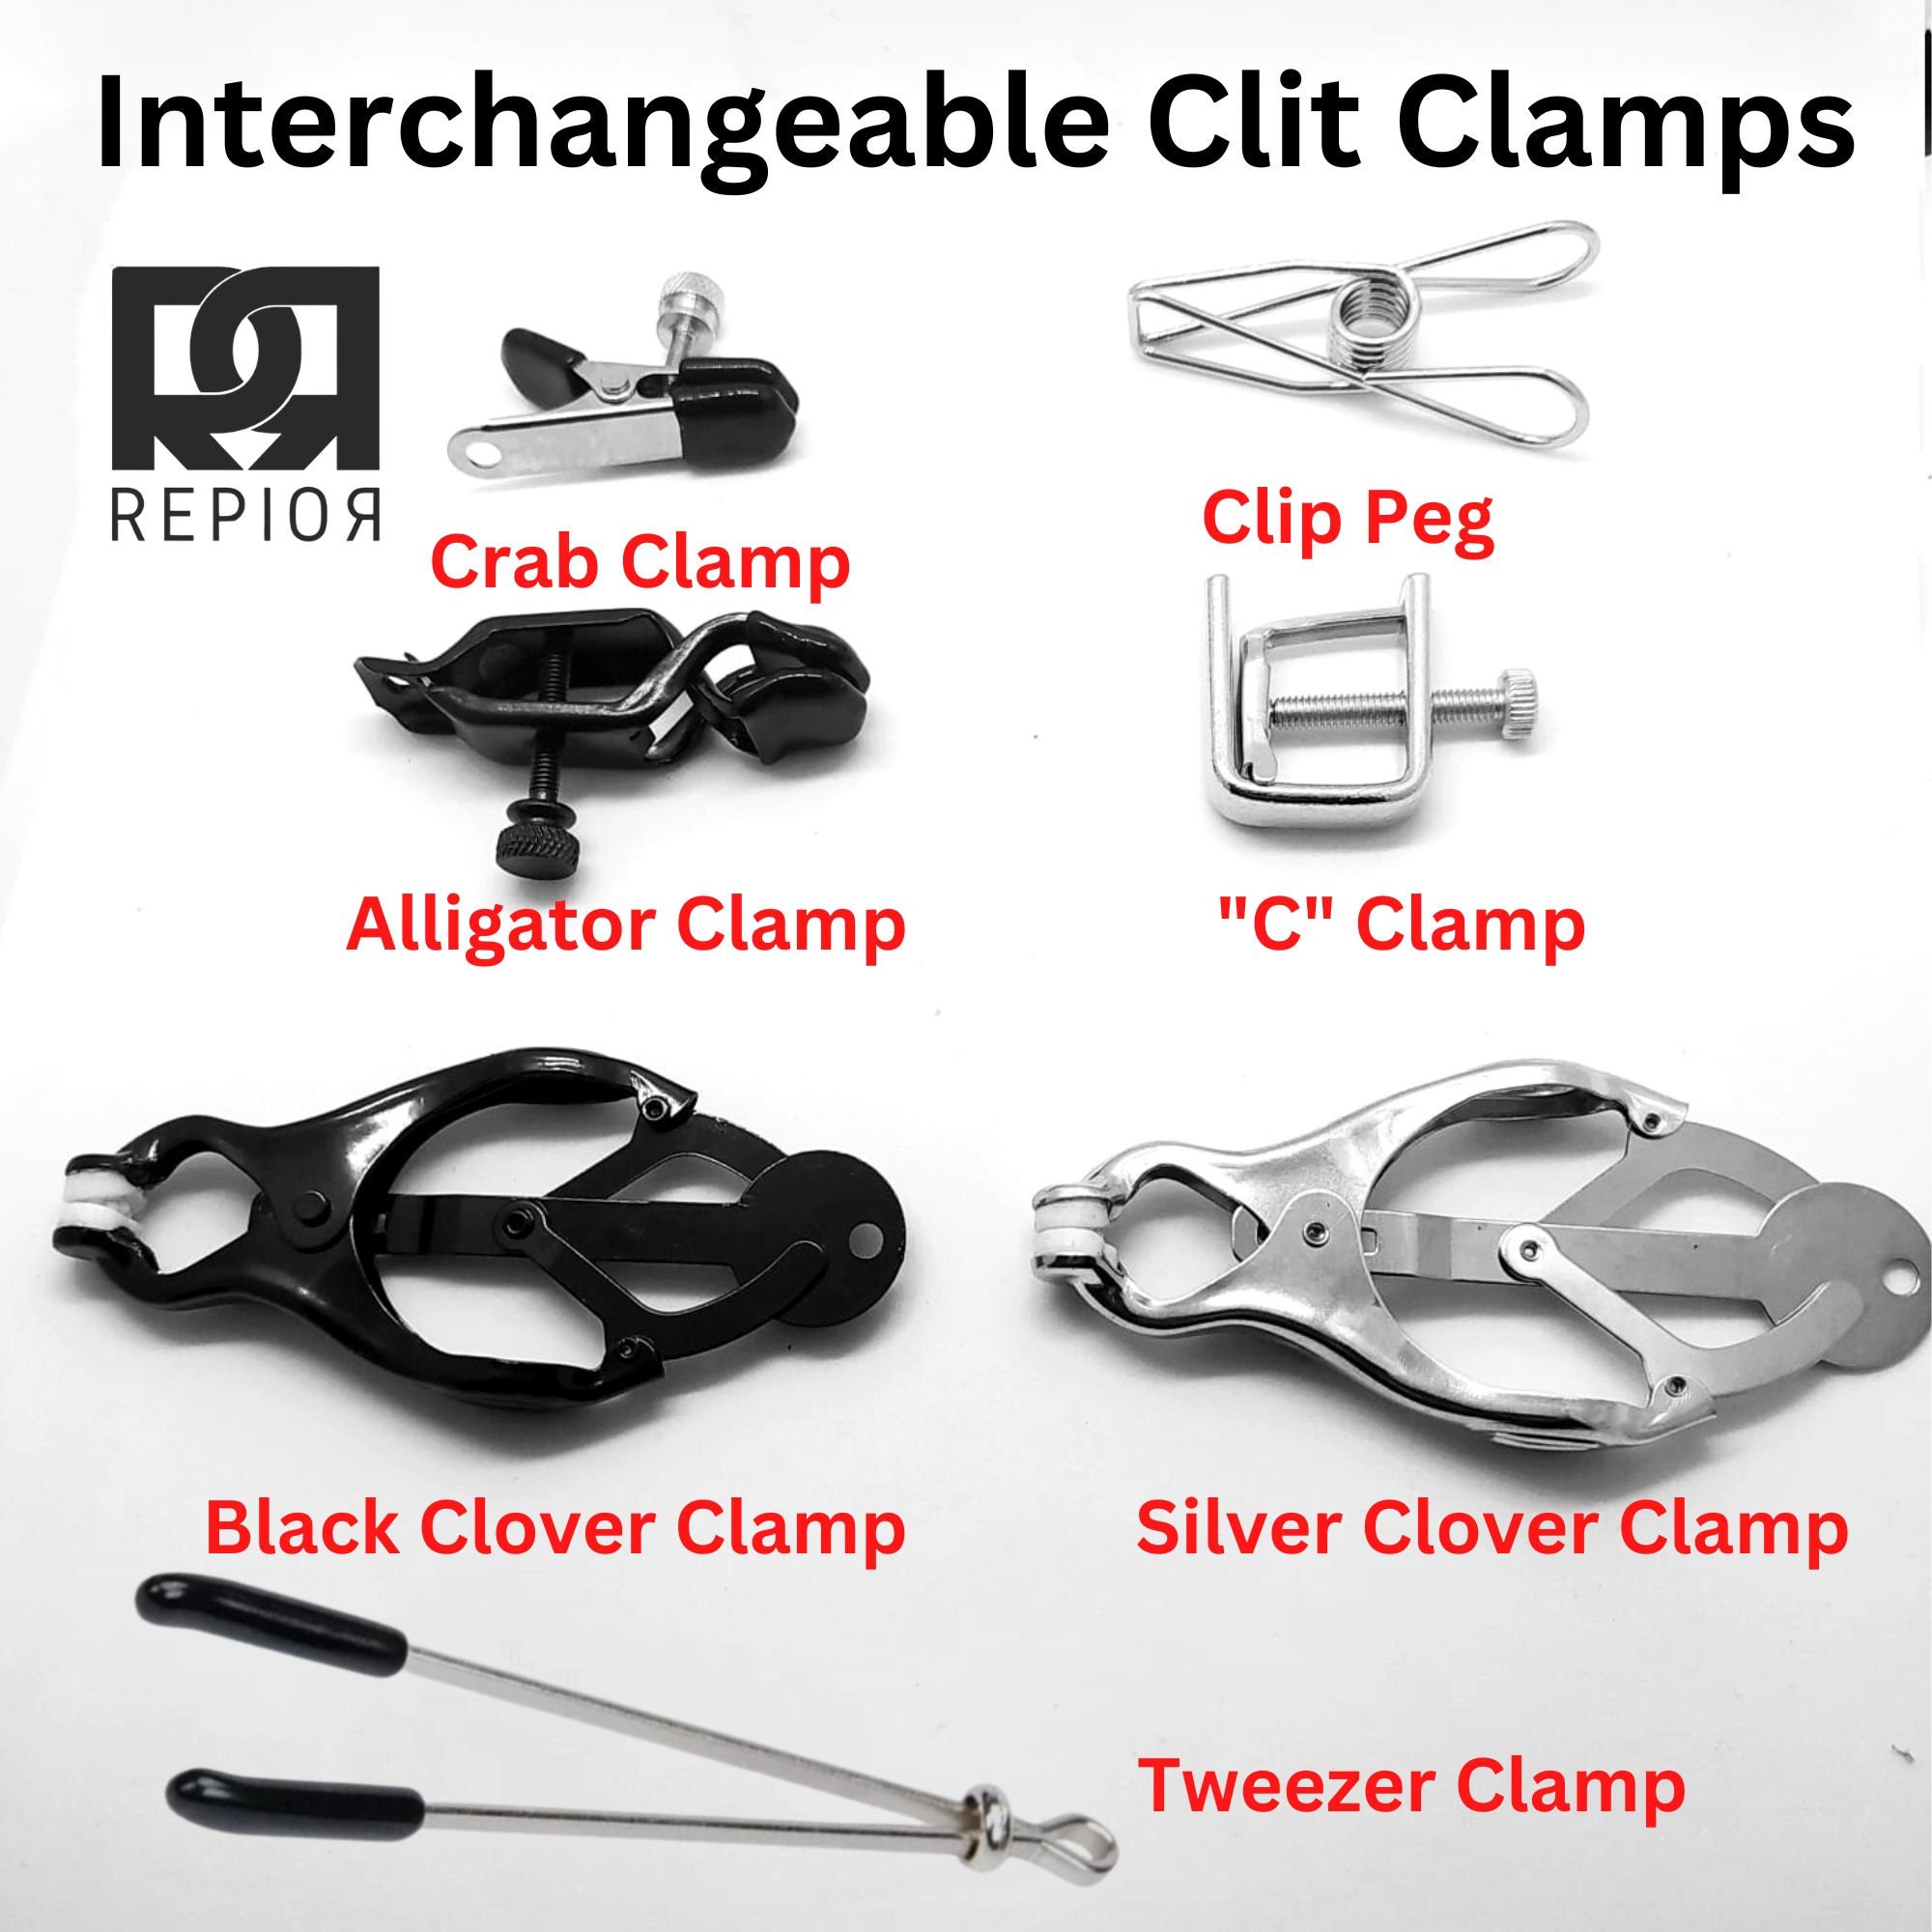 Best of What is a clit clamp